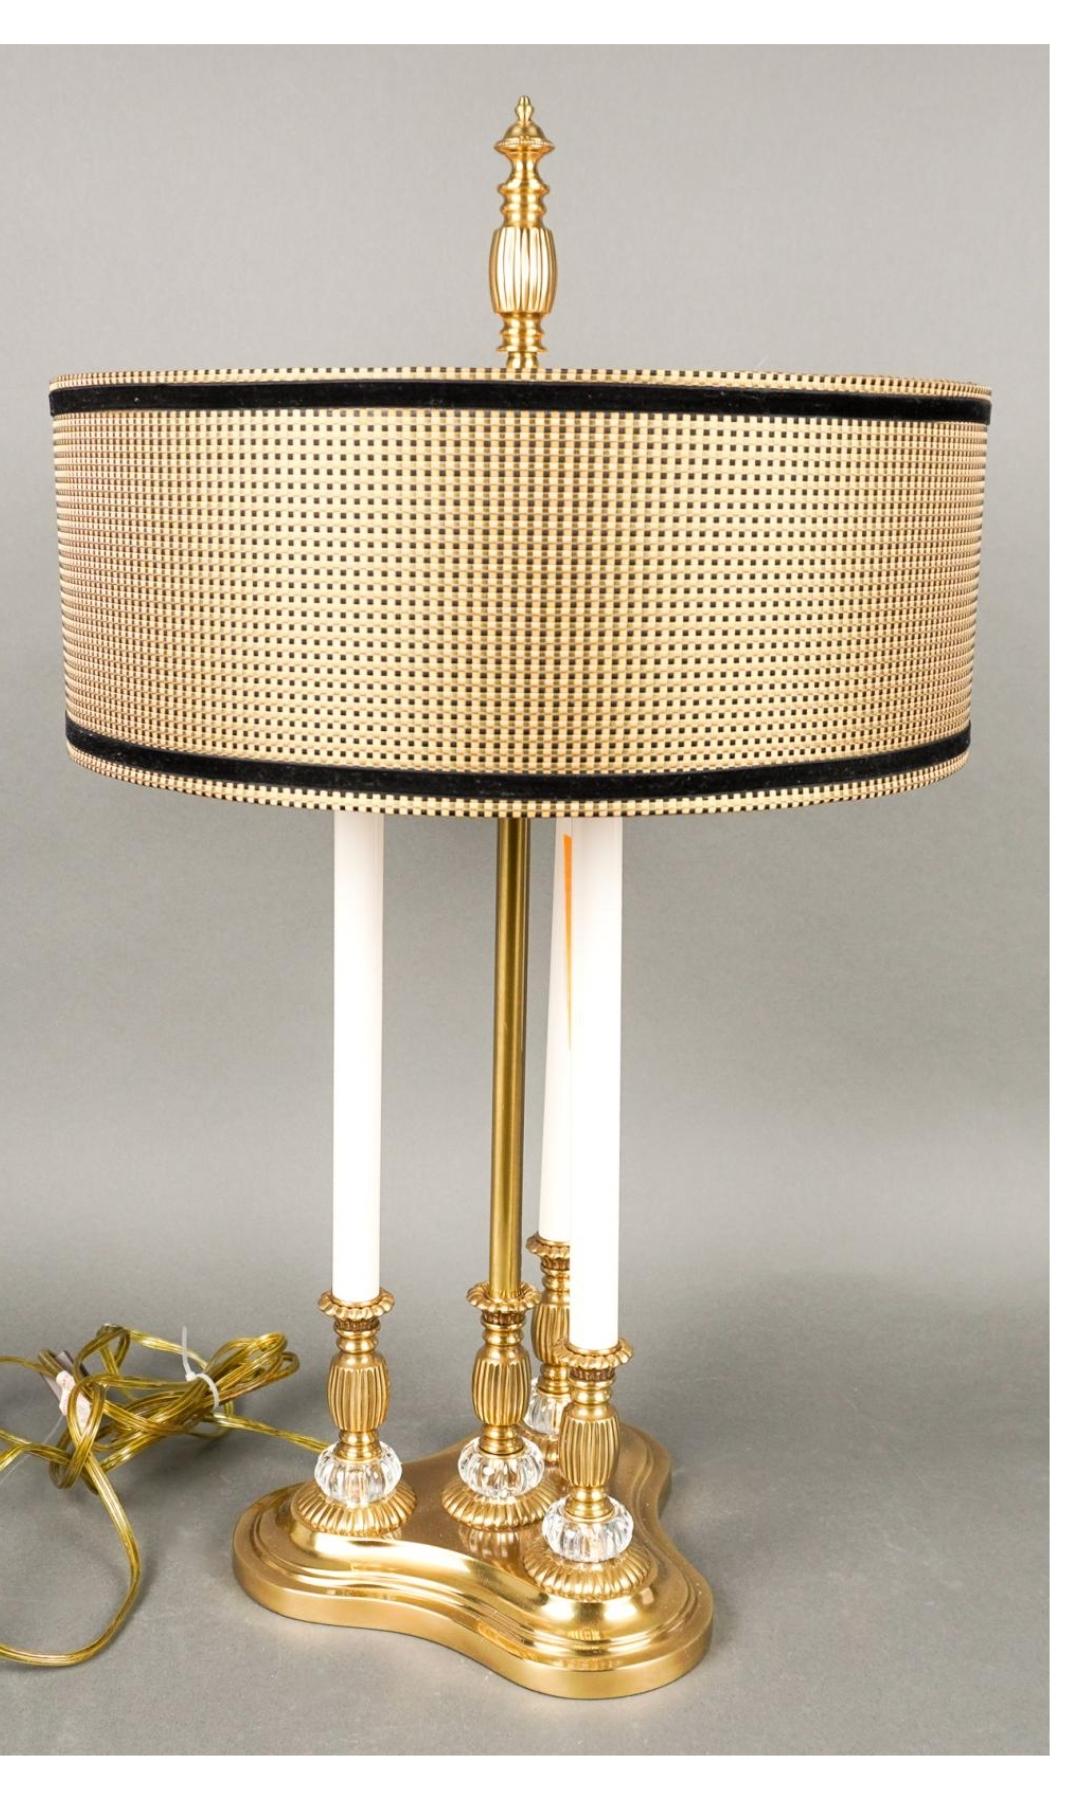 A stunning Frederick Cooper Brass Bouillote Lamp with Original black and yellowish gold/ yellow Silk Velvet Shade. Excellent condition
Measures at the base 10